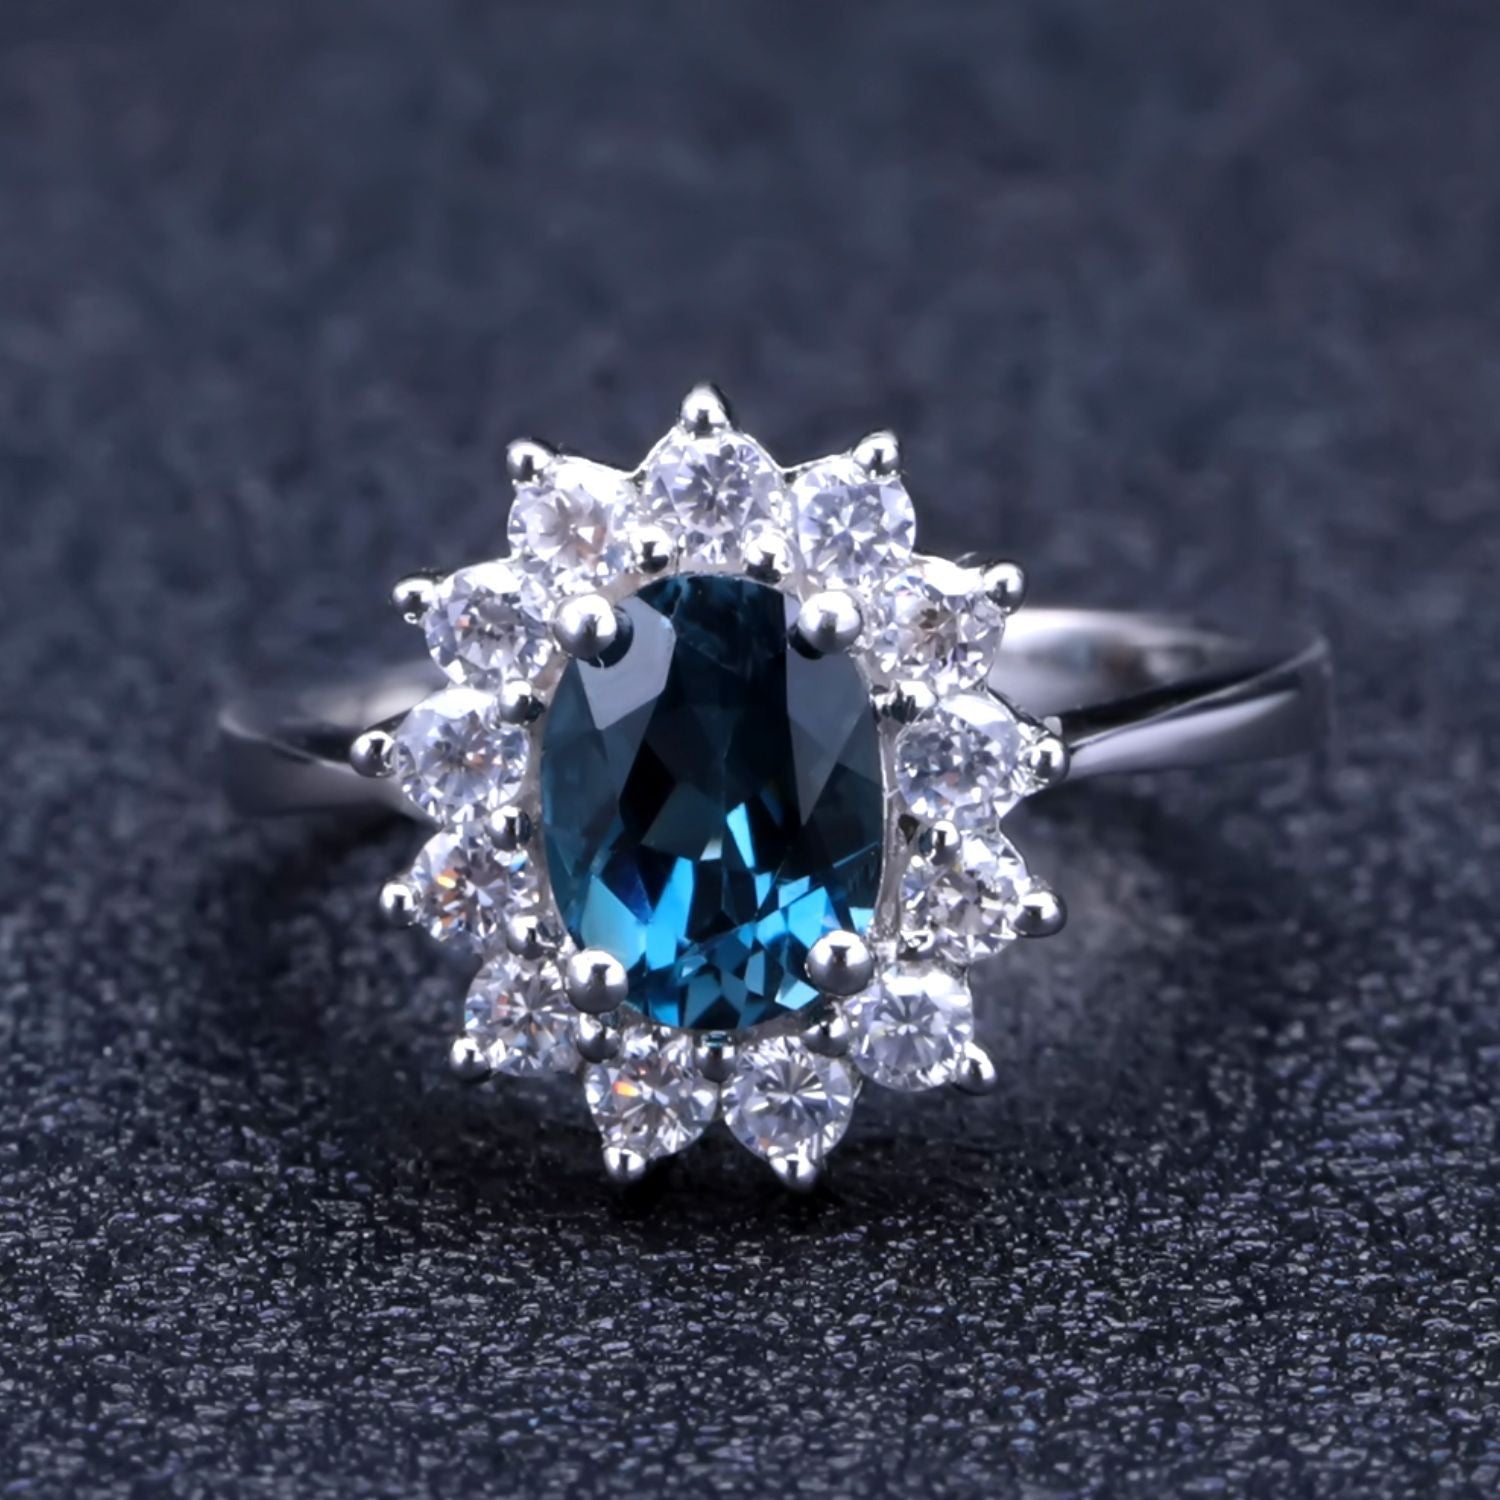 Luxury Colorful S925 Sterling Silver Natural Topaz Ring for Women